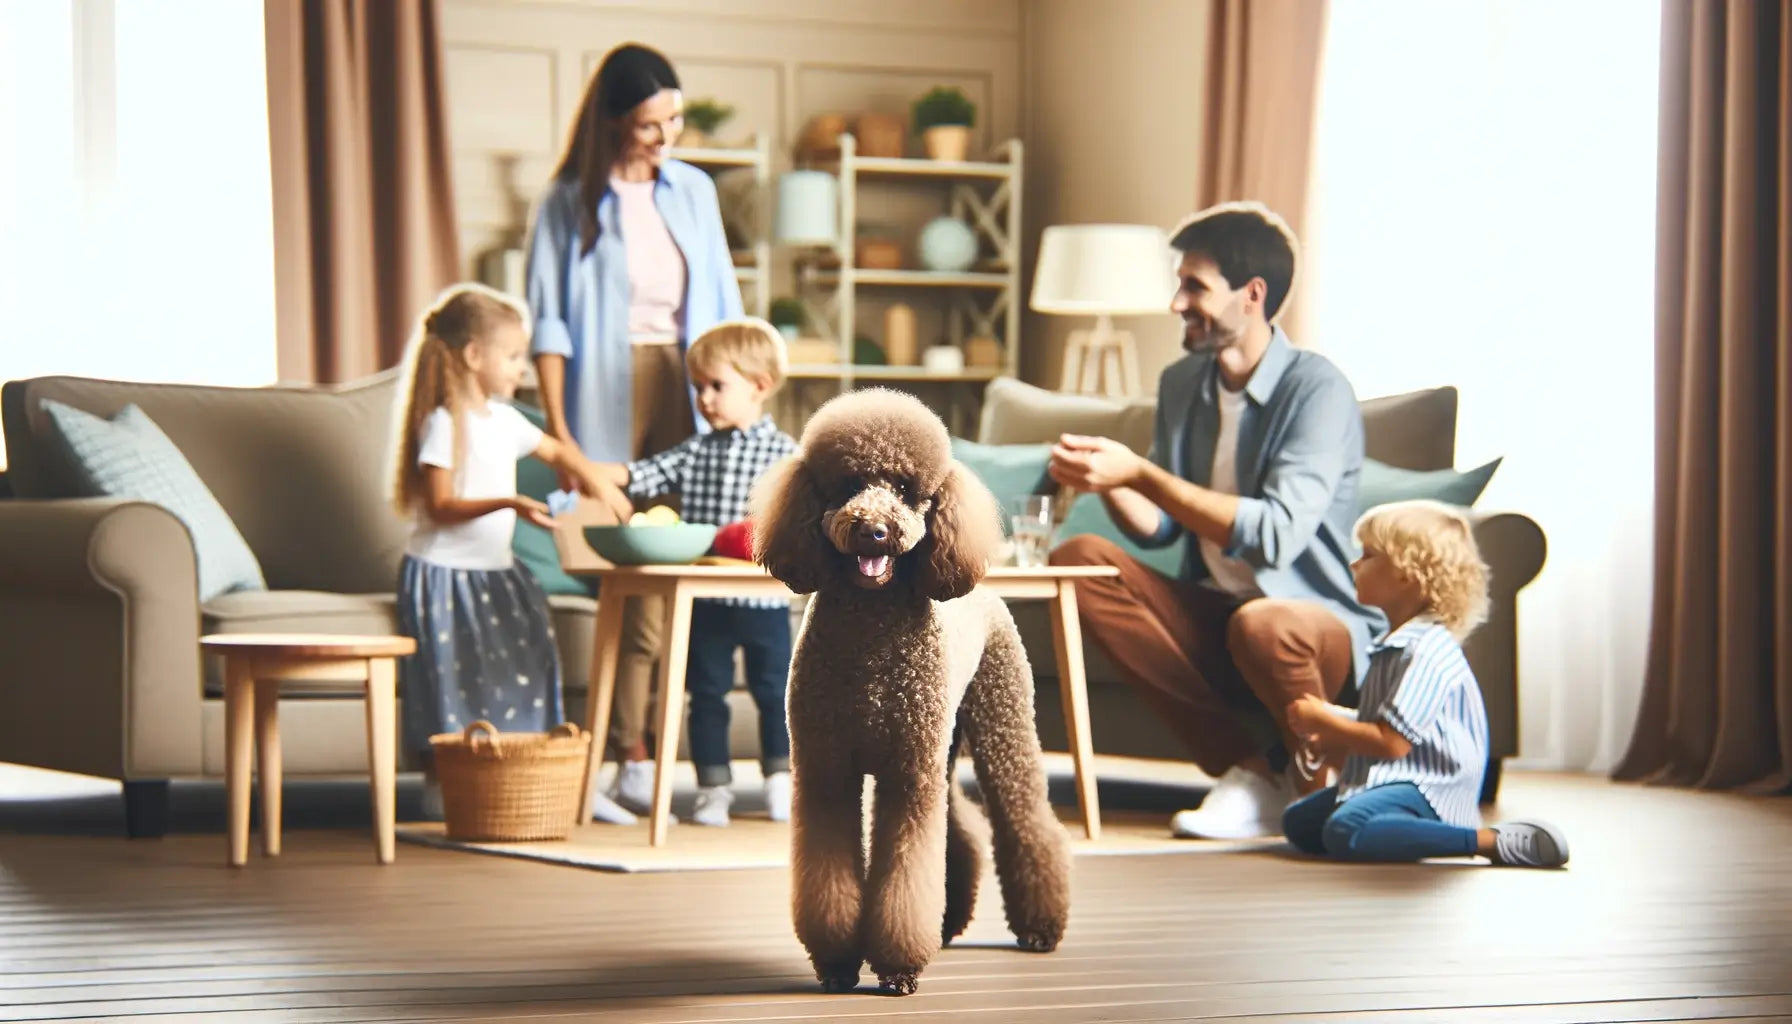 A brown Poodle in a family environment, interacting with both children and adults in a home setting.